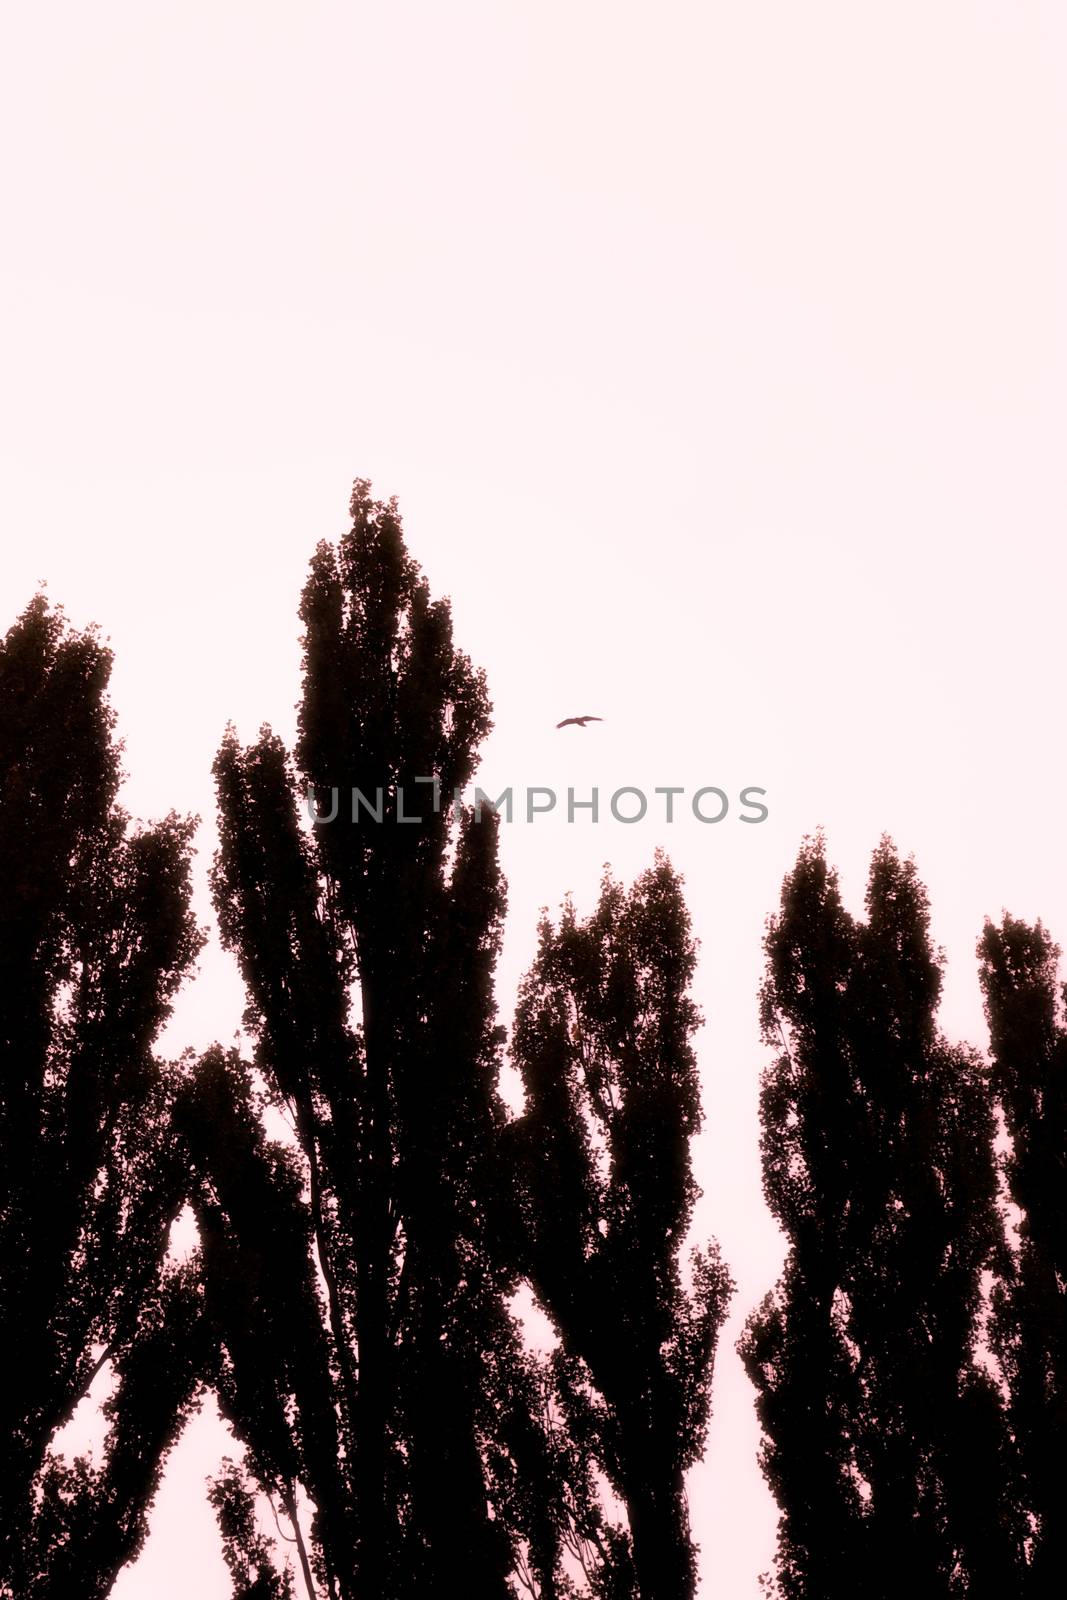 Autumn poplar trees silhouettes and a bird in the gray sky